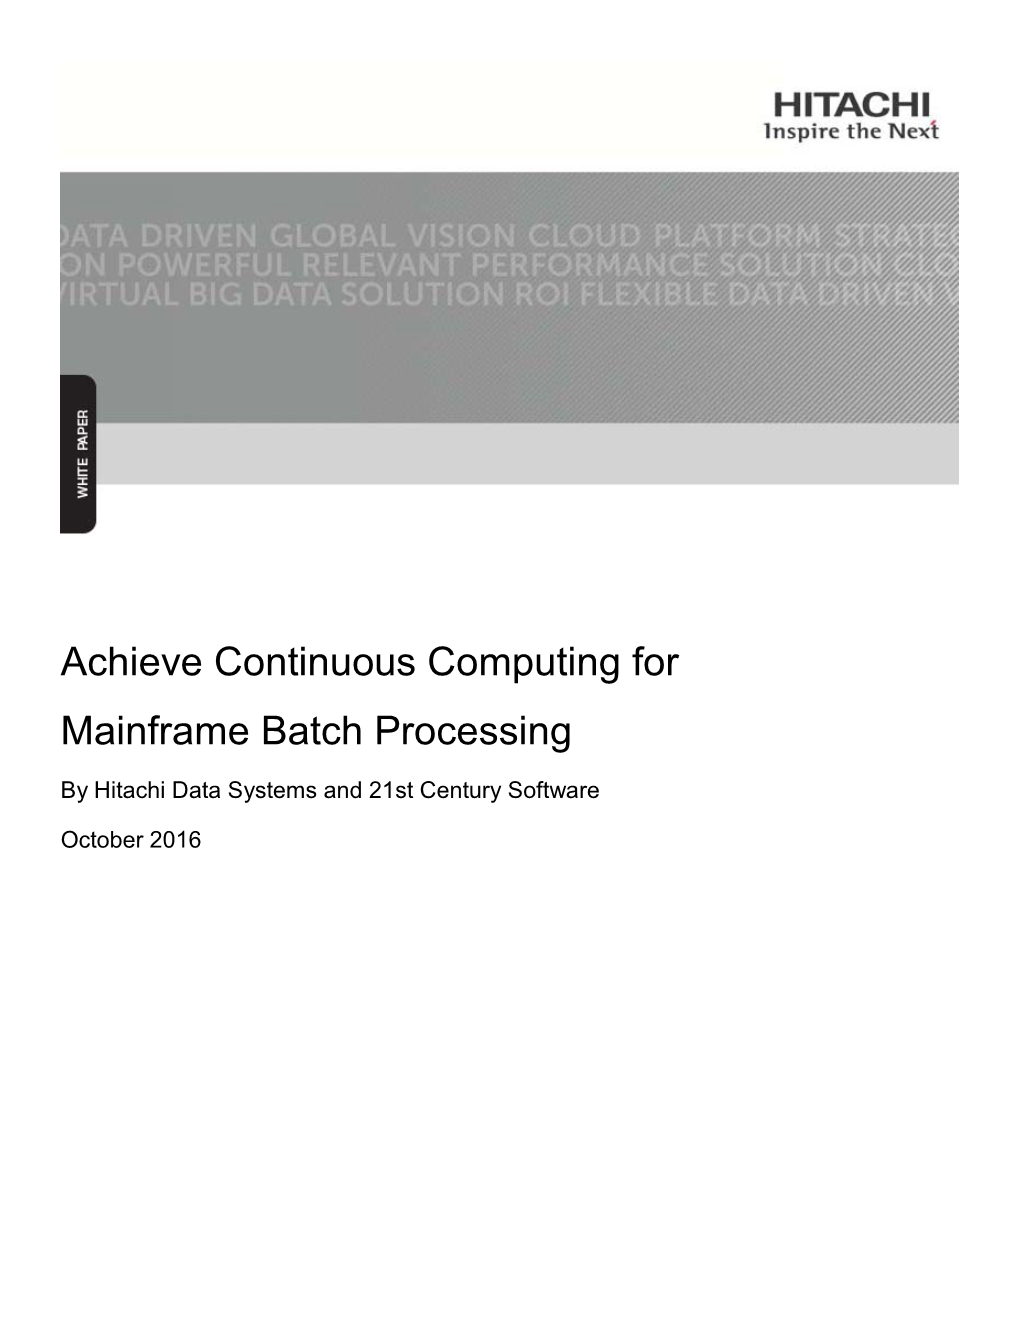 Achieve Continuous Computing for Mainframe Batch Processing